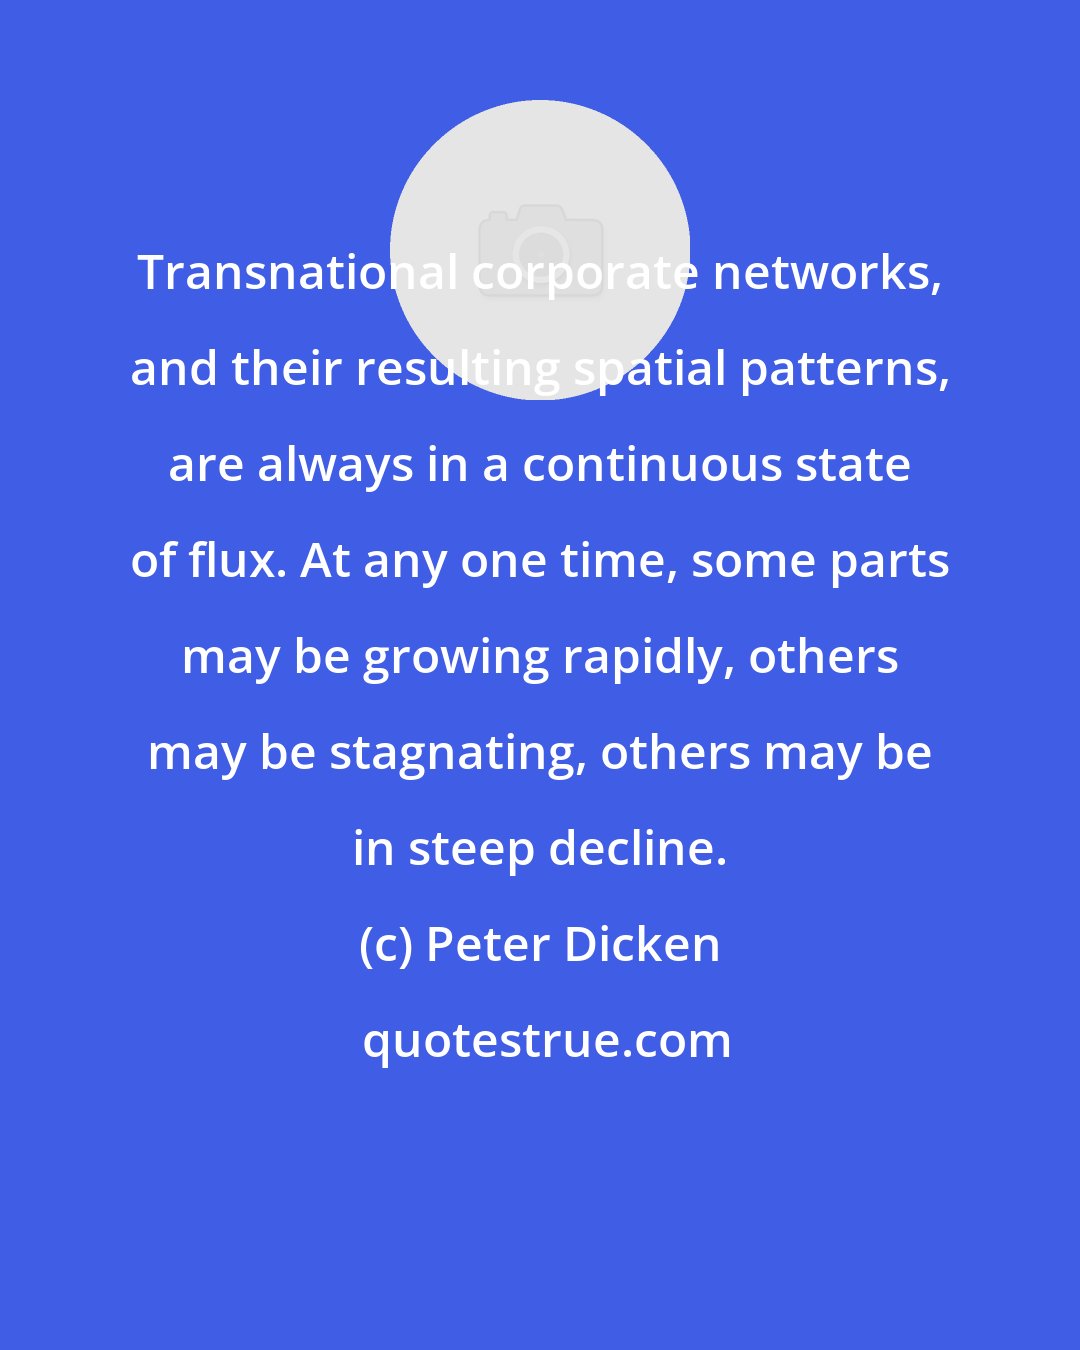 Peter Dicken: Transnational corporate networks, and their resulting spatial patterns, are always in a continuous state of flux. At any one time, some parts may be growing rapidly, others may be stagnating, others may be in steep decline.